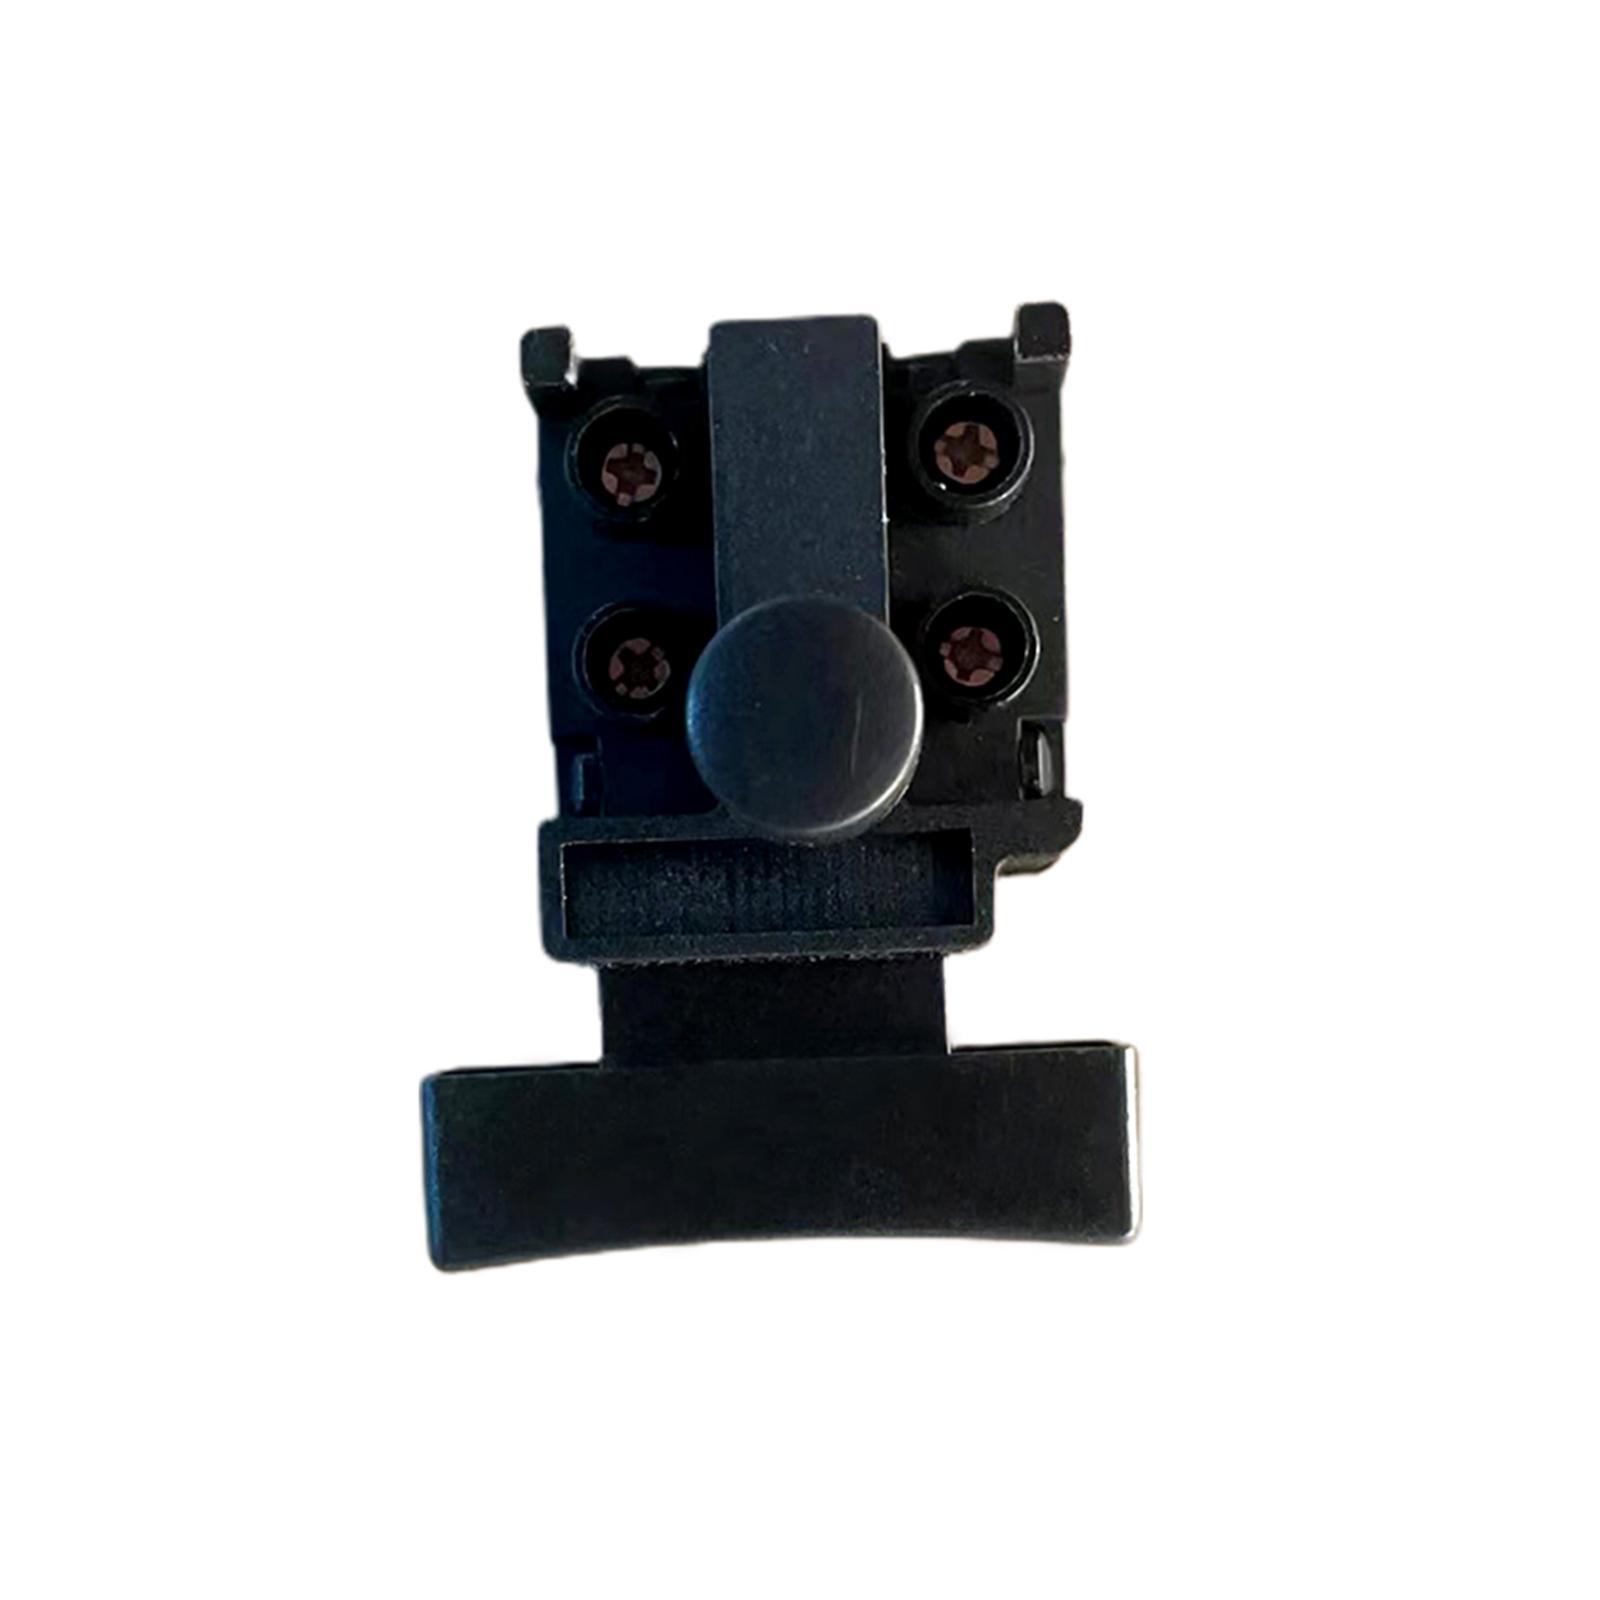 Power Tool Switch Power Tool Accessories Workshop Equipment Parts Attachment